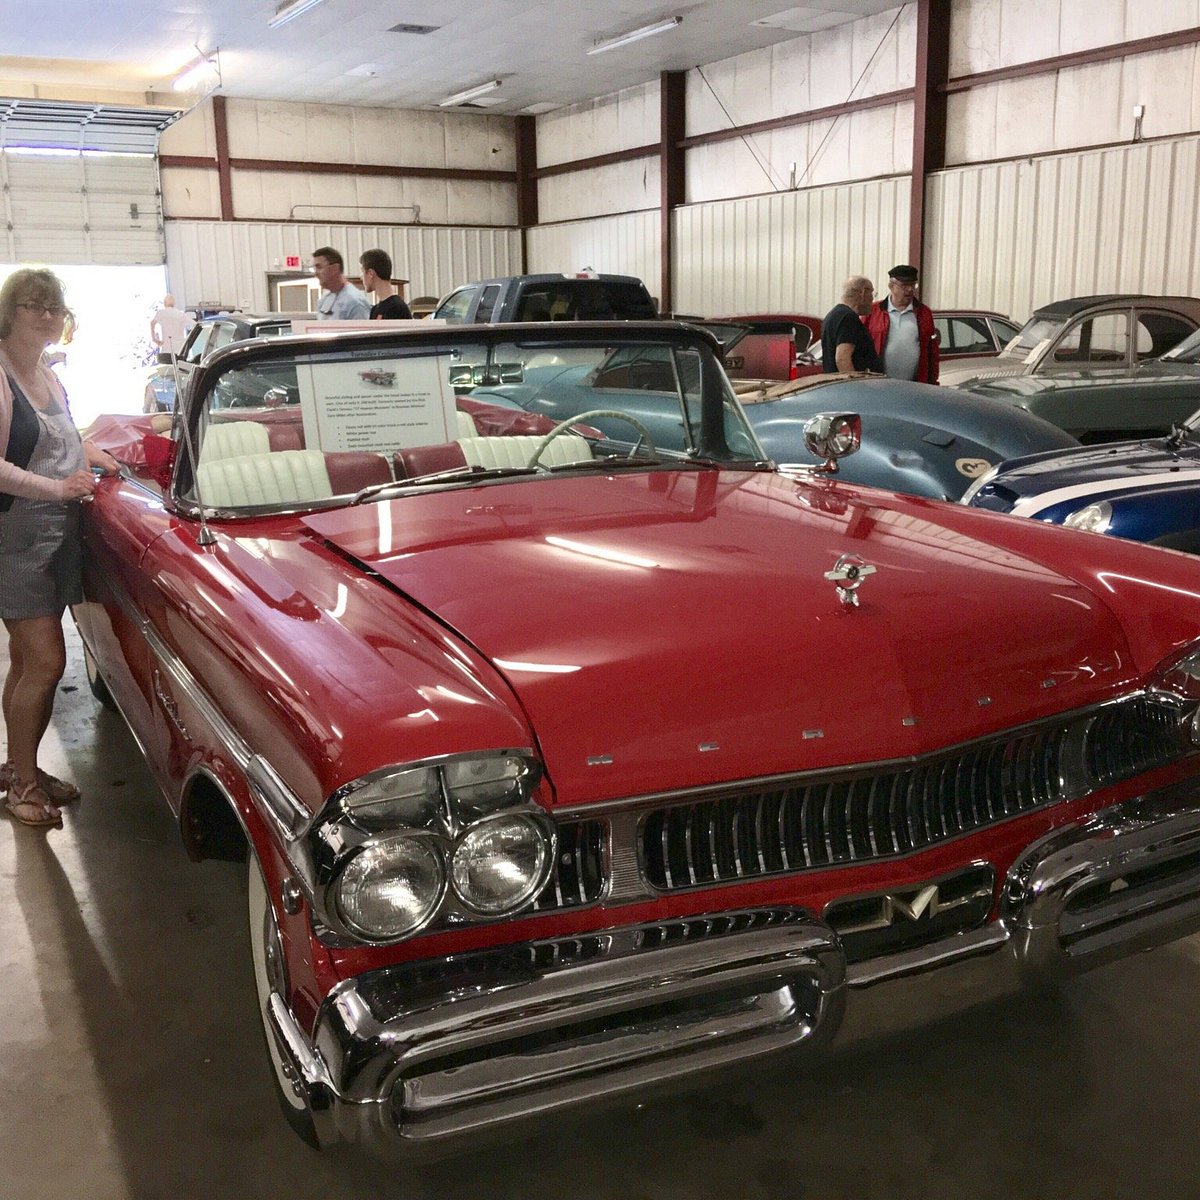 Sarasota Classic Car Museum All You Need To Know Before You Go